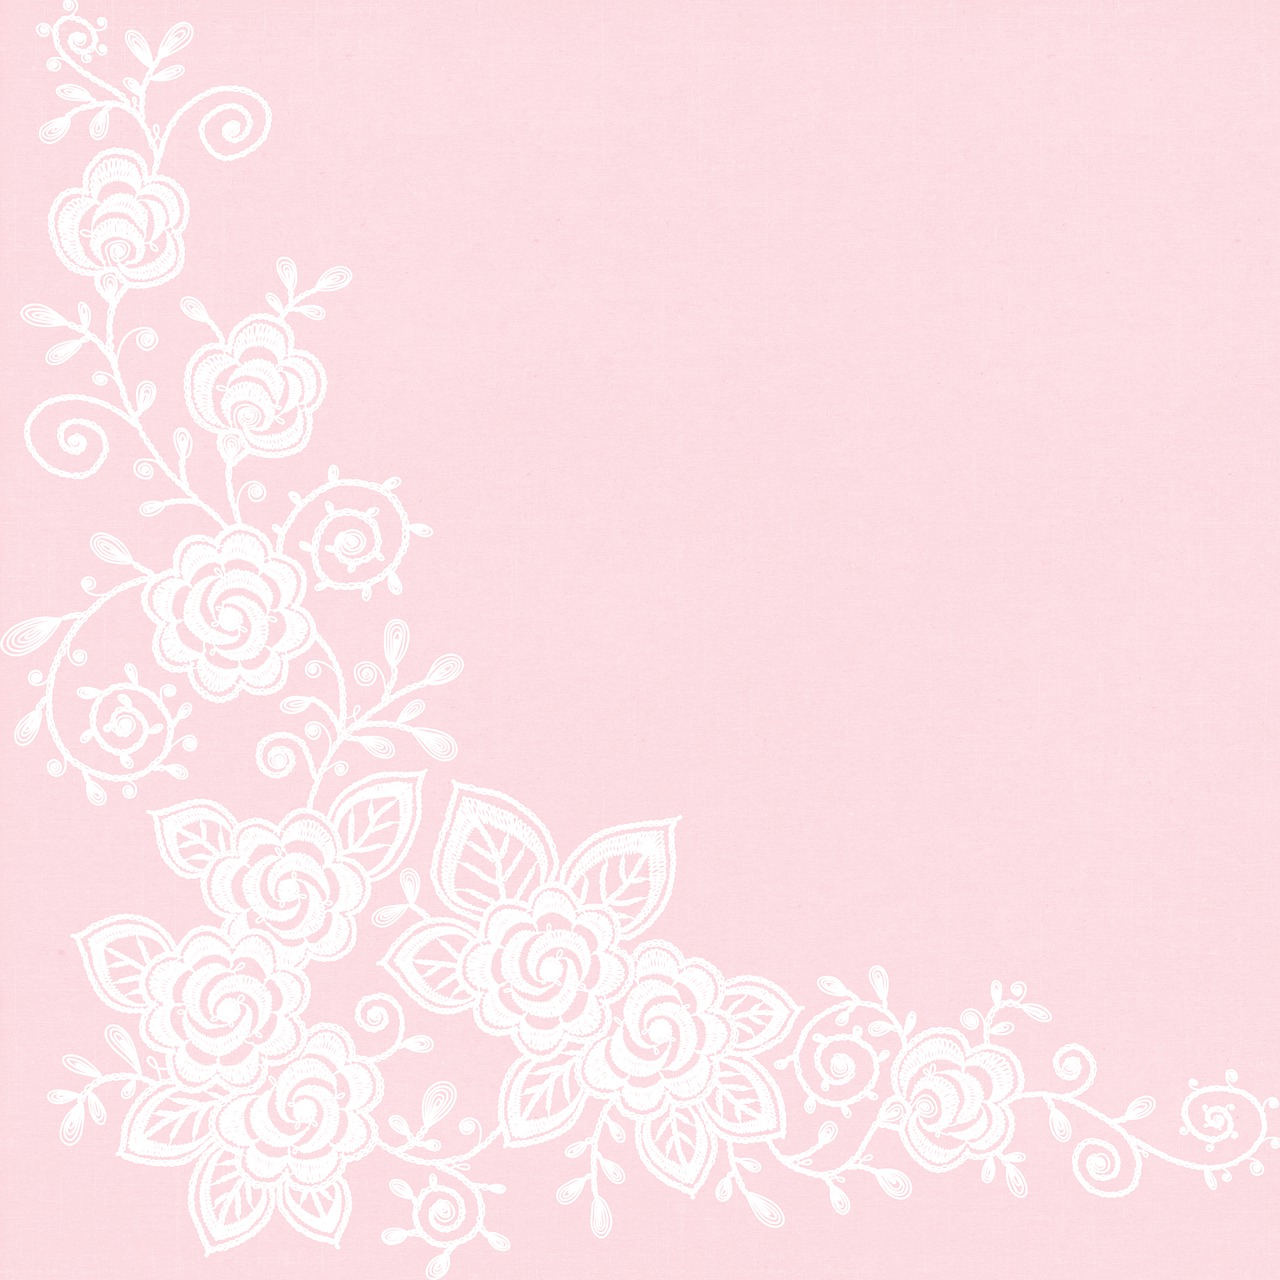 a pink background with white flowers and vines, a pastel, inspired by Martina Krupičková, tumblr, arabesque, blank paper, corner, pink rose, bride